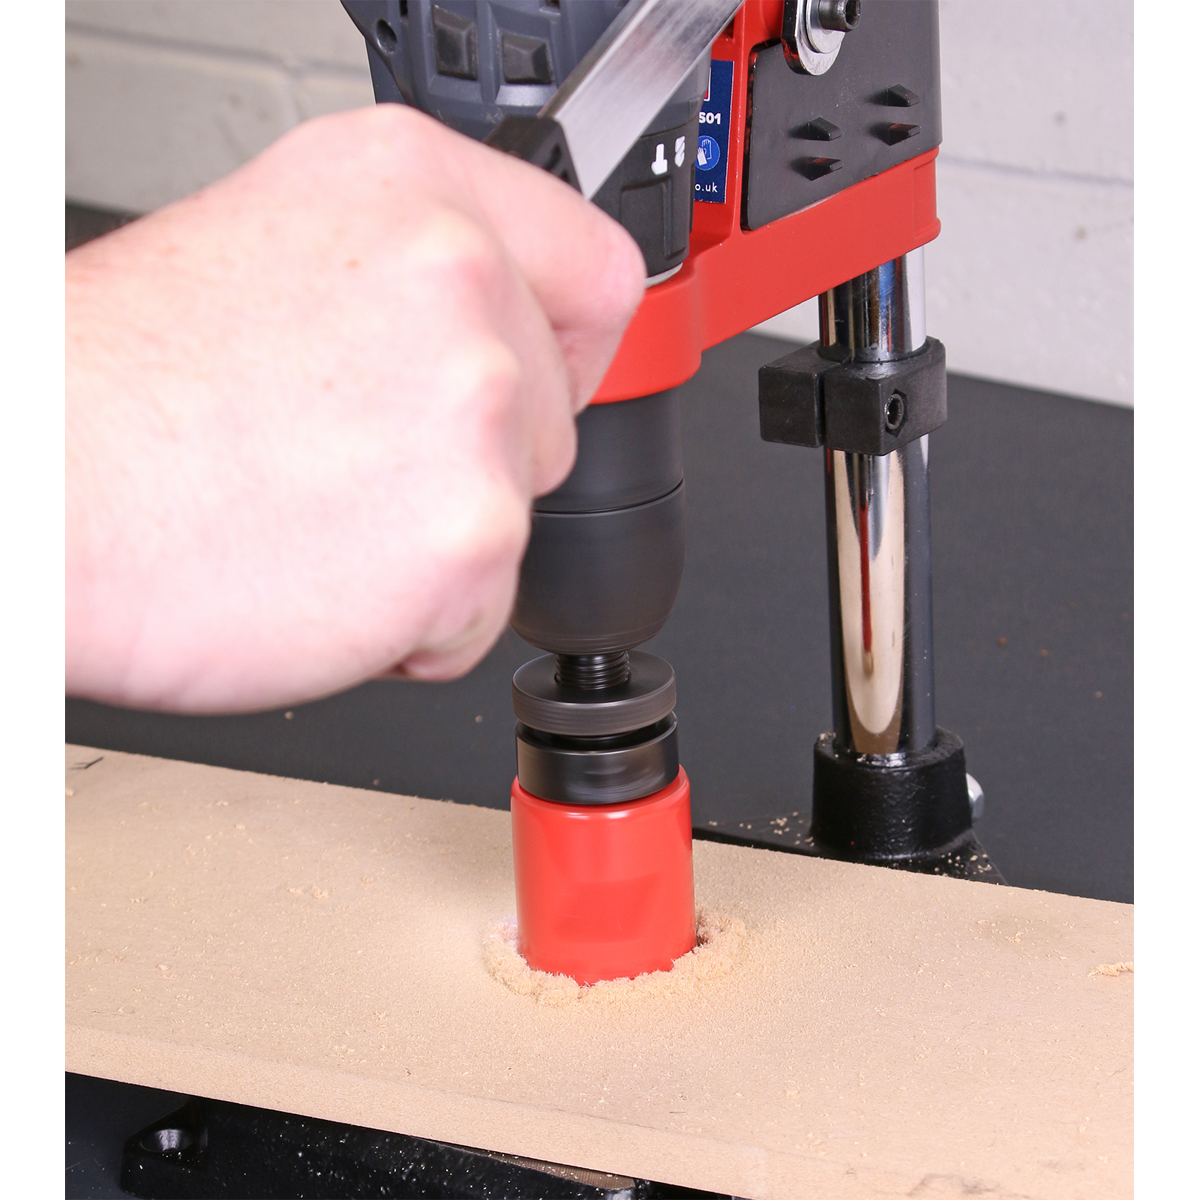 Drill vice features a quick jaw release feature to allow fast and easy adjustment to suit the workpiece.